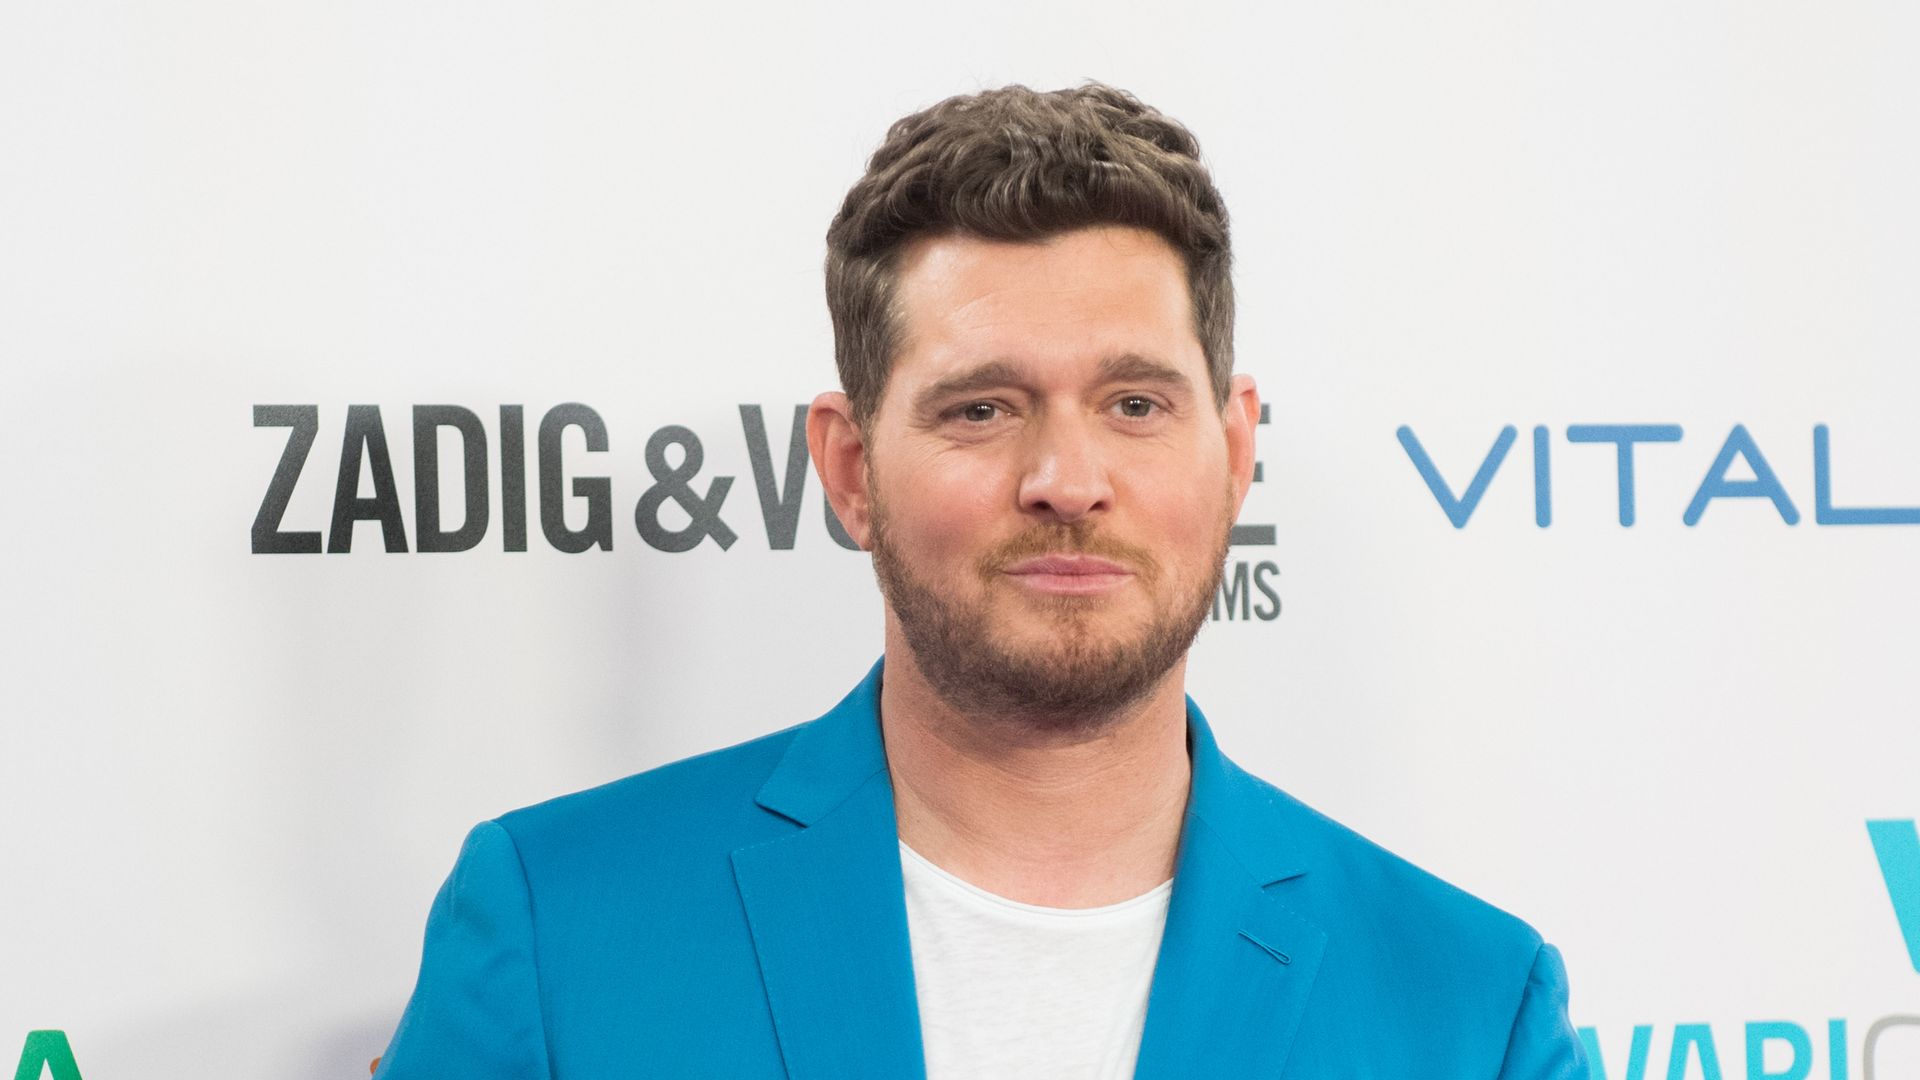 Michael Bublé attends the 30th anniversary of Cadena 100 concerts at the Wanda Metropolitano Stadium on June 25, 2022 in Madrid, Spain.